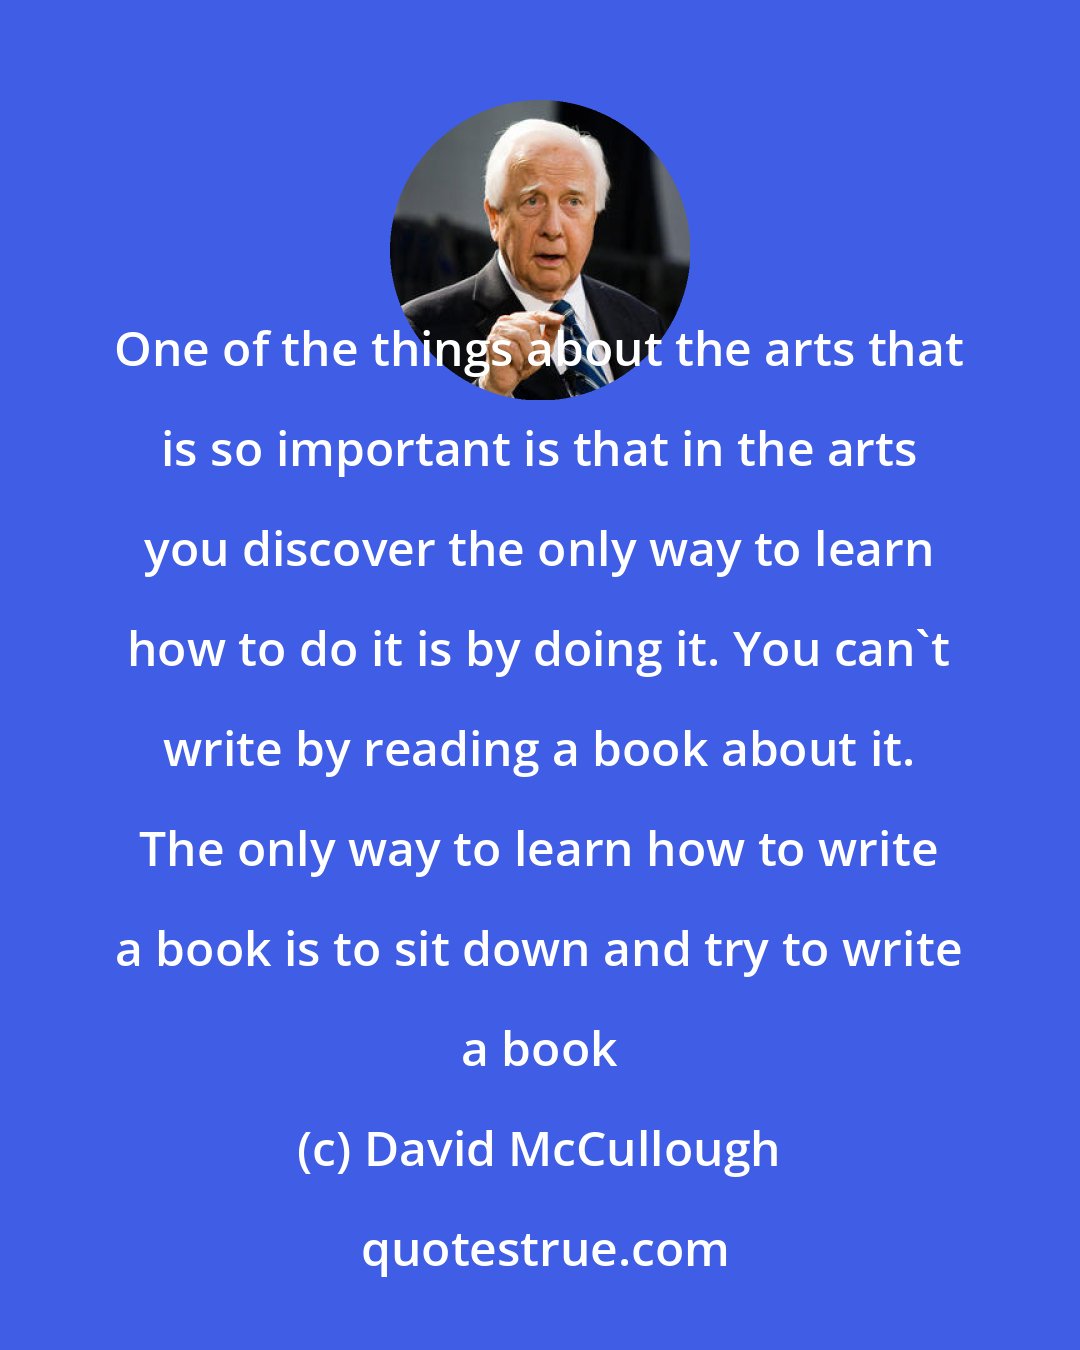 David McCullough: One of the things about the arts that is so important is that in the arts you discover the only way to learn how to do it is by doing it. You can't write by reading a book about it. The only way to learn how to write a book is to sit down and try to write a book